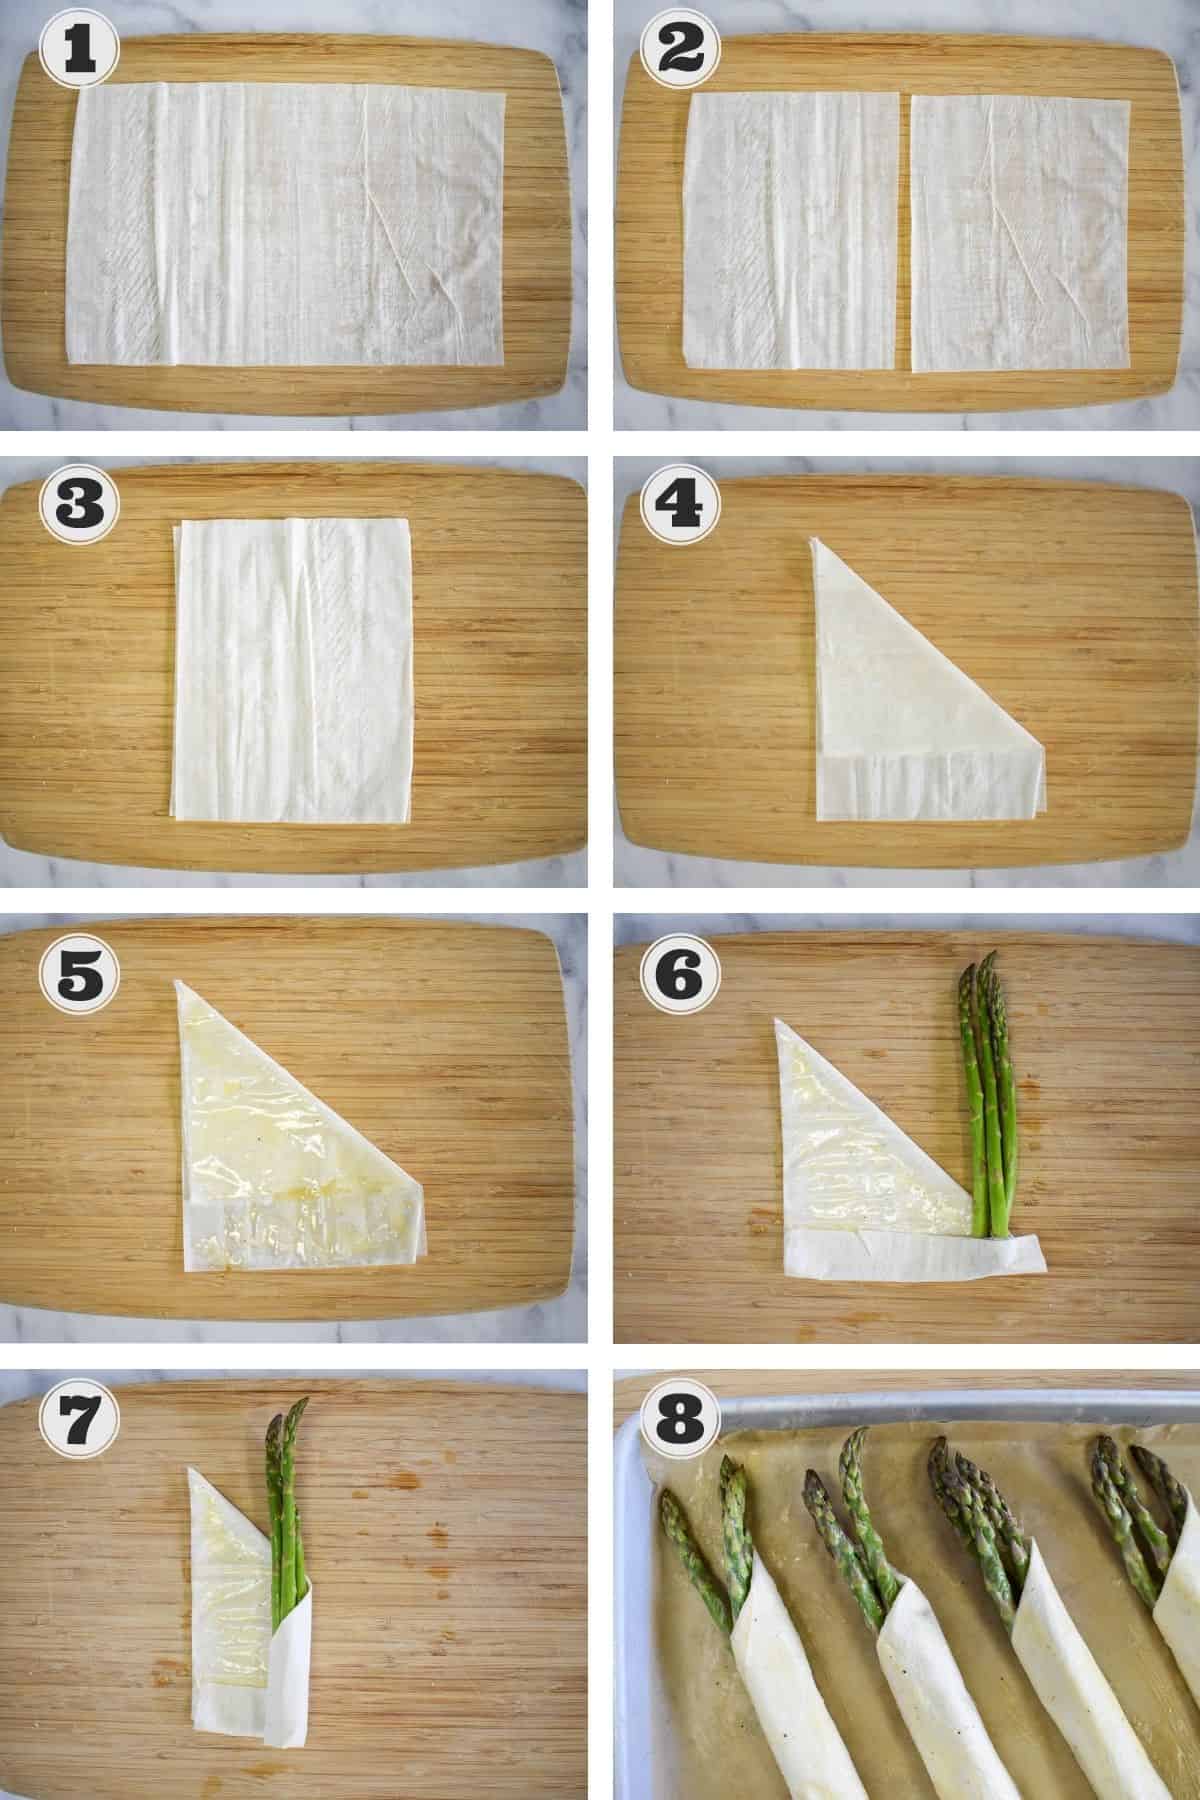 Eight images illustrating the process of making the asparagus rolls.